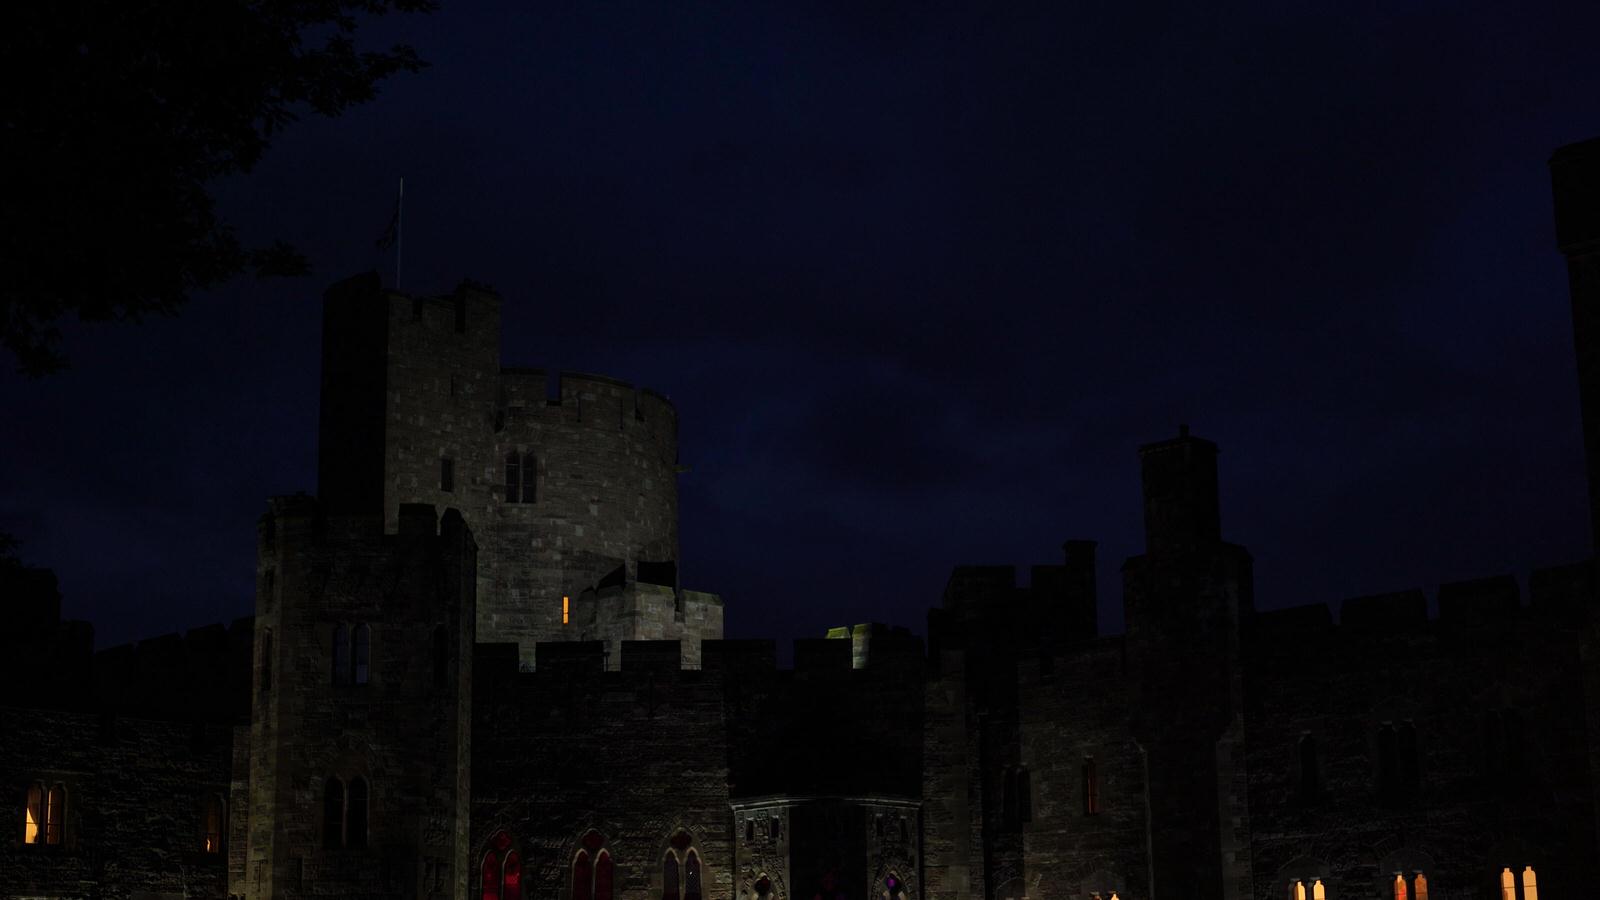 peckforton castle in cheshire at night lit up